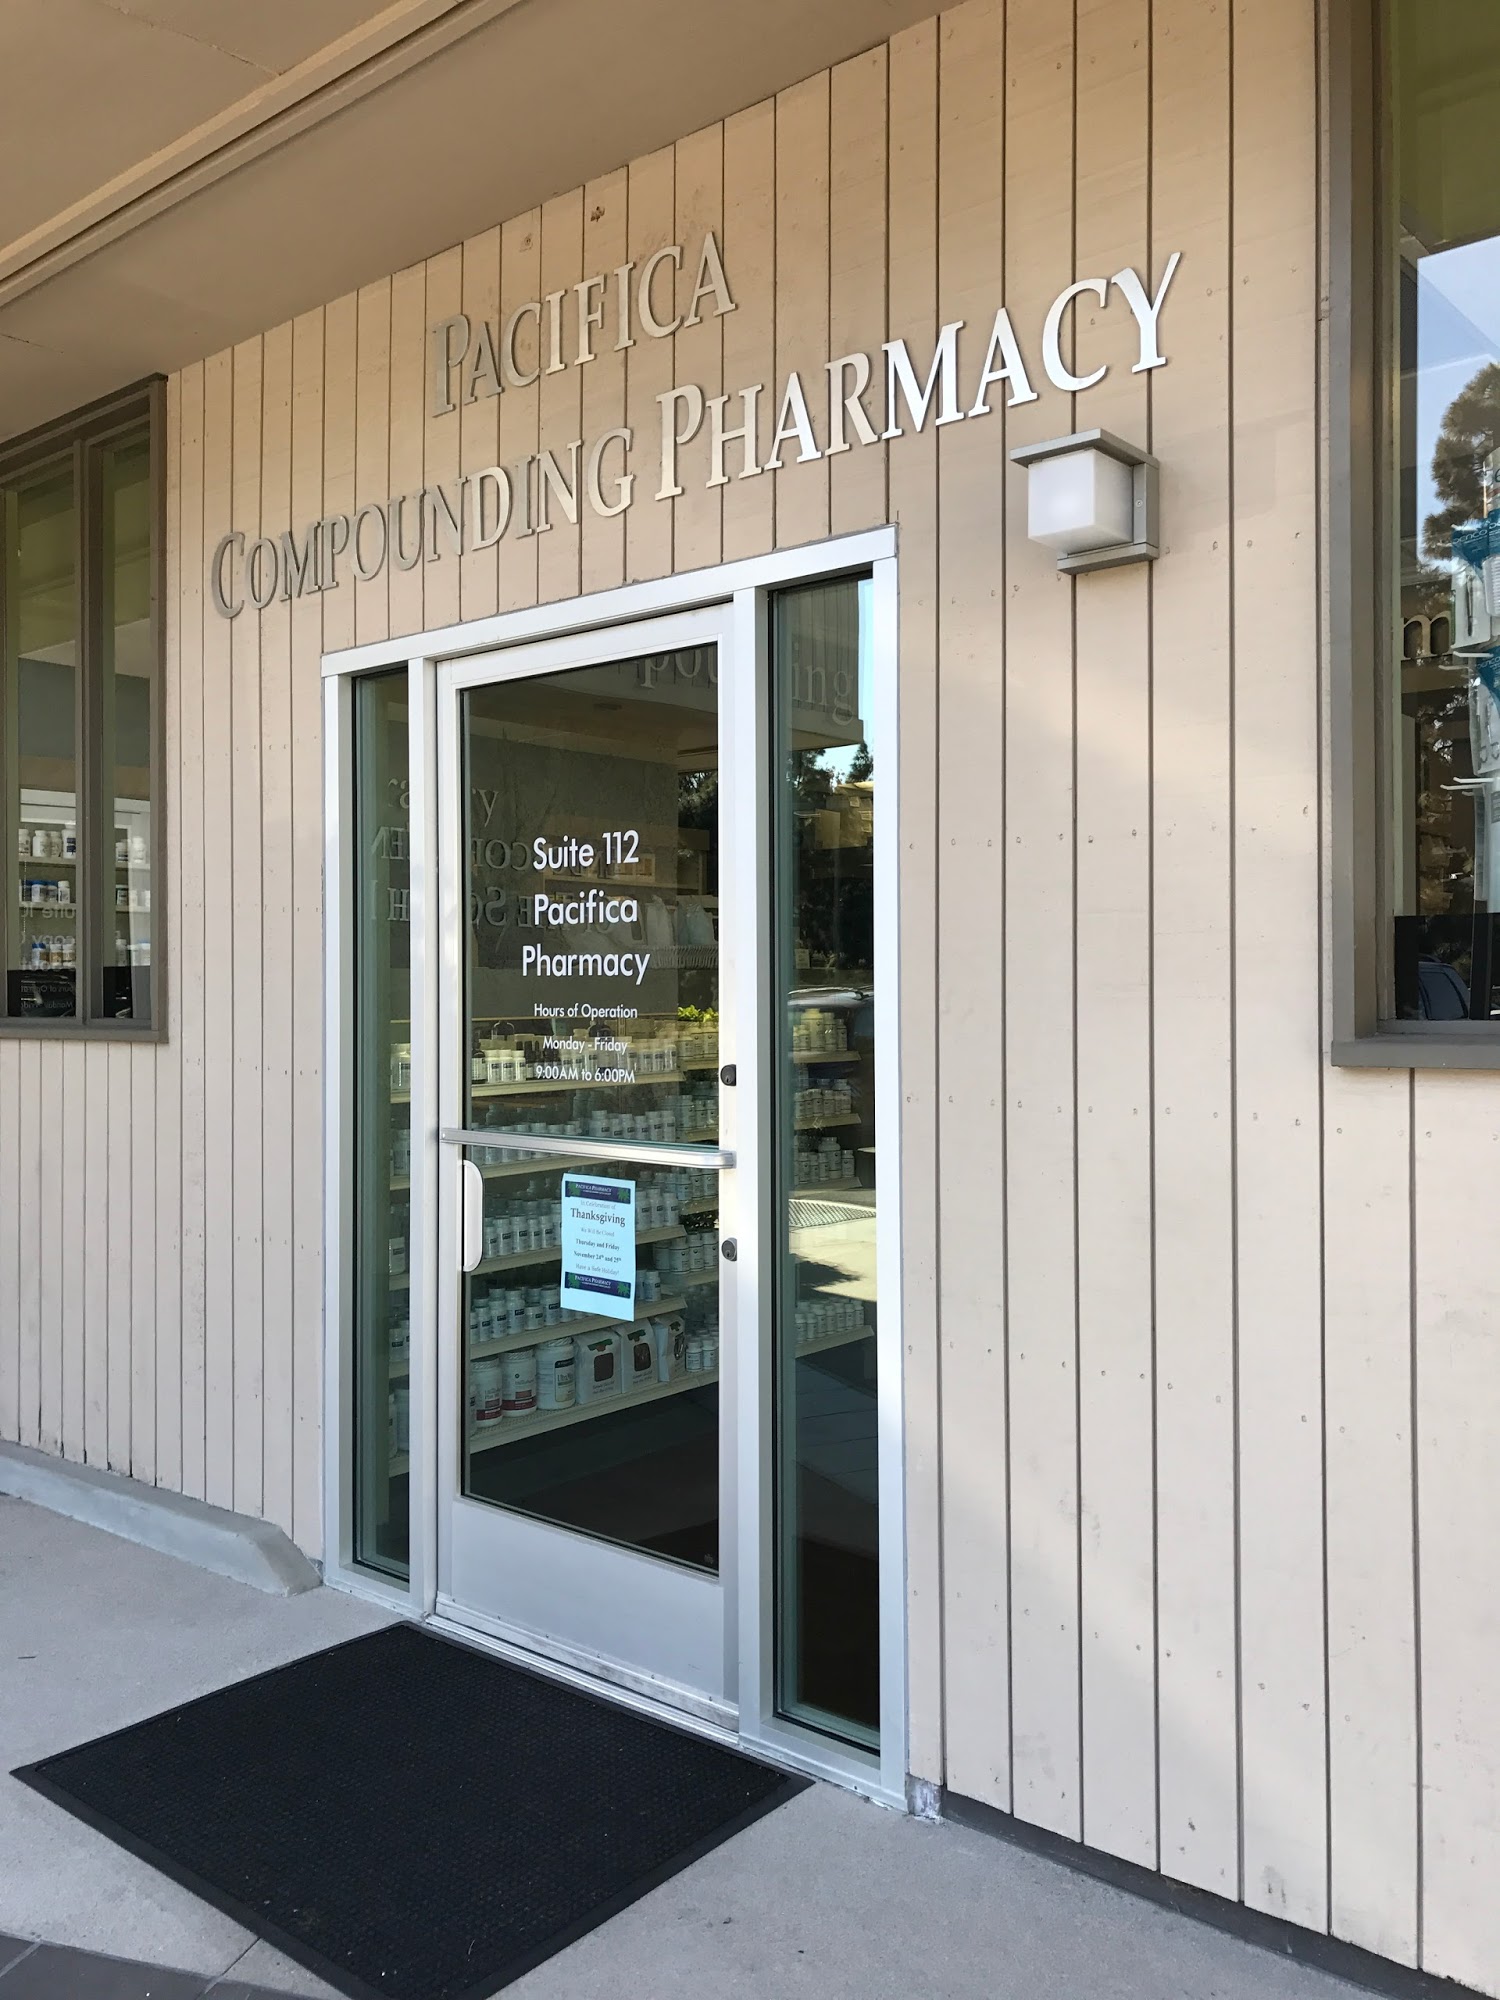 Pacifica Compounding Pharmacy